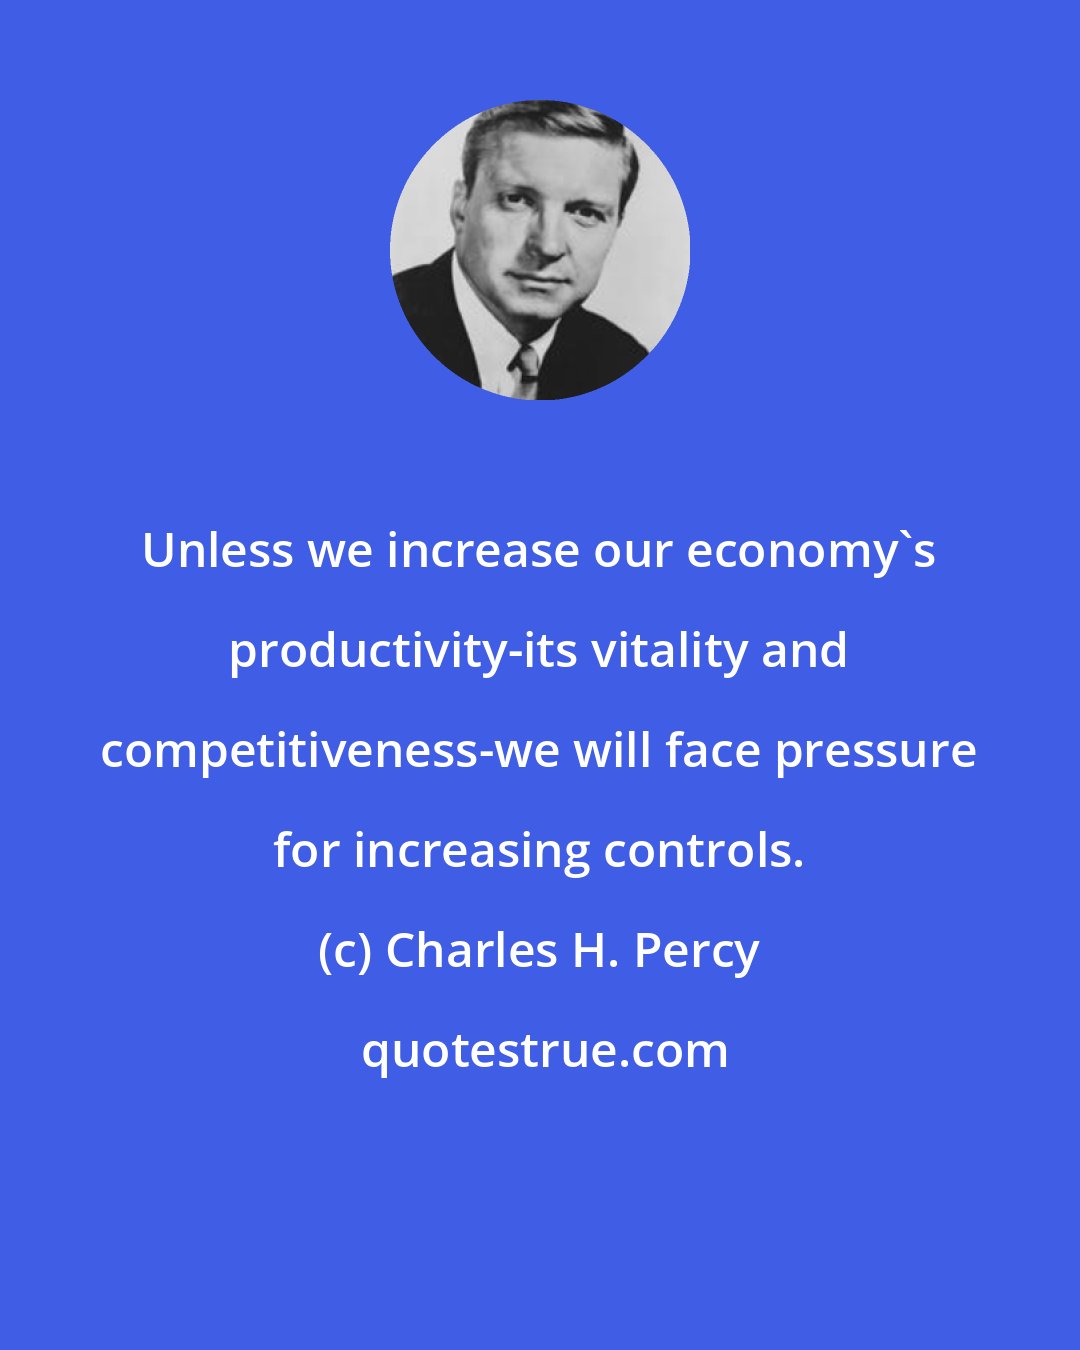 Charles H. Percy: Unless we increase our economy's productivity-its vitality and competitiveness-we will face pressure for increasing controls.